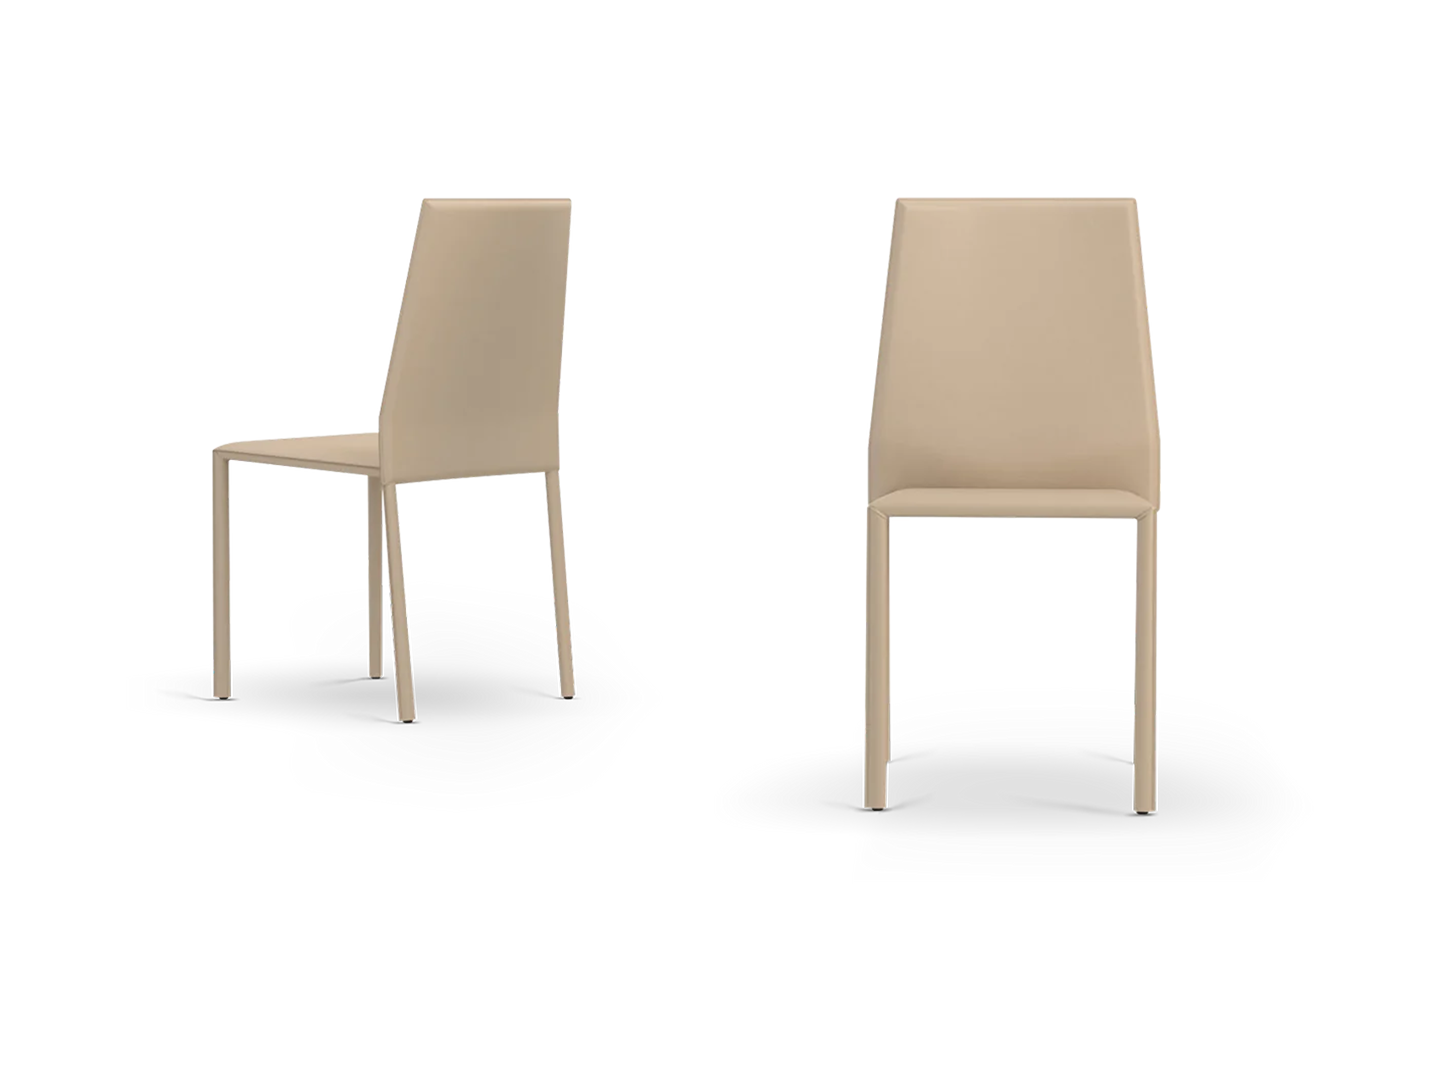 Lave Dining Chair